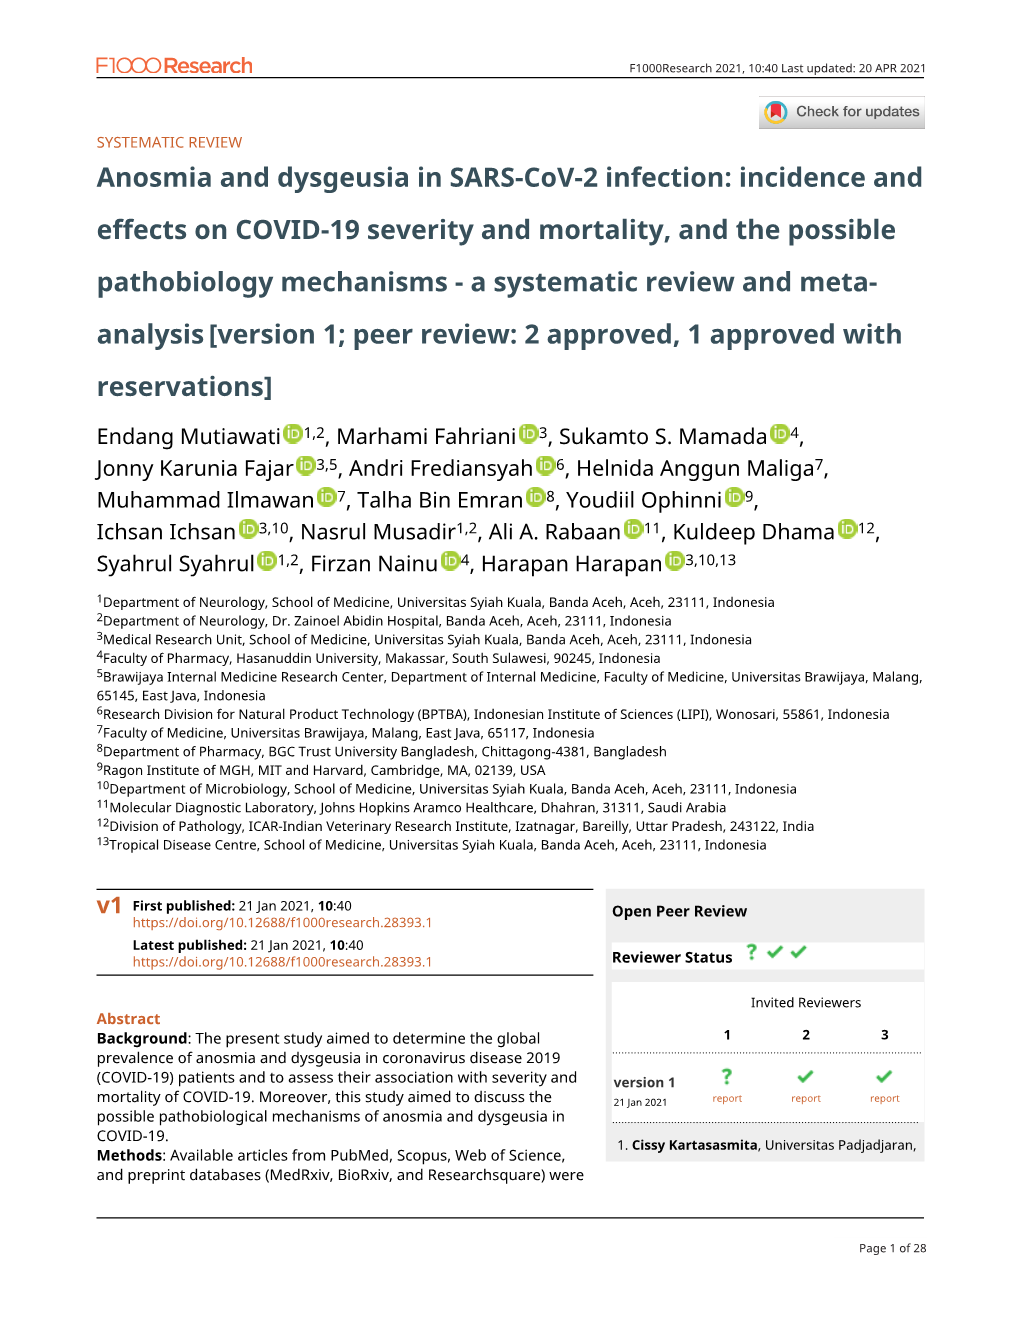 Anosmia and Dysgeusia in SARS-Cov-2 Infection: Incidence